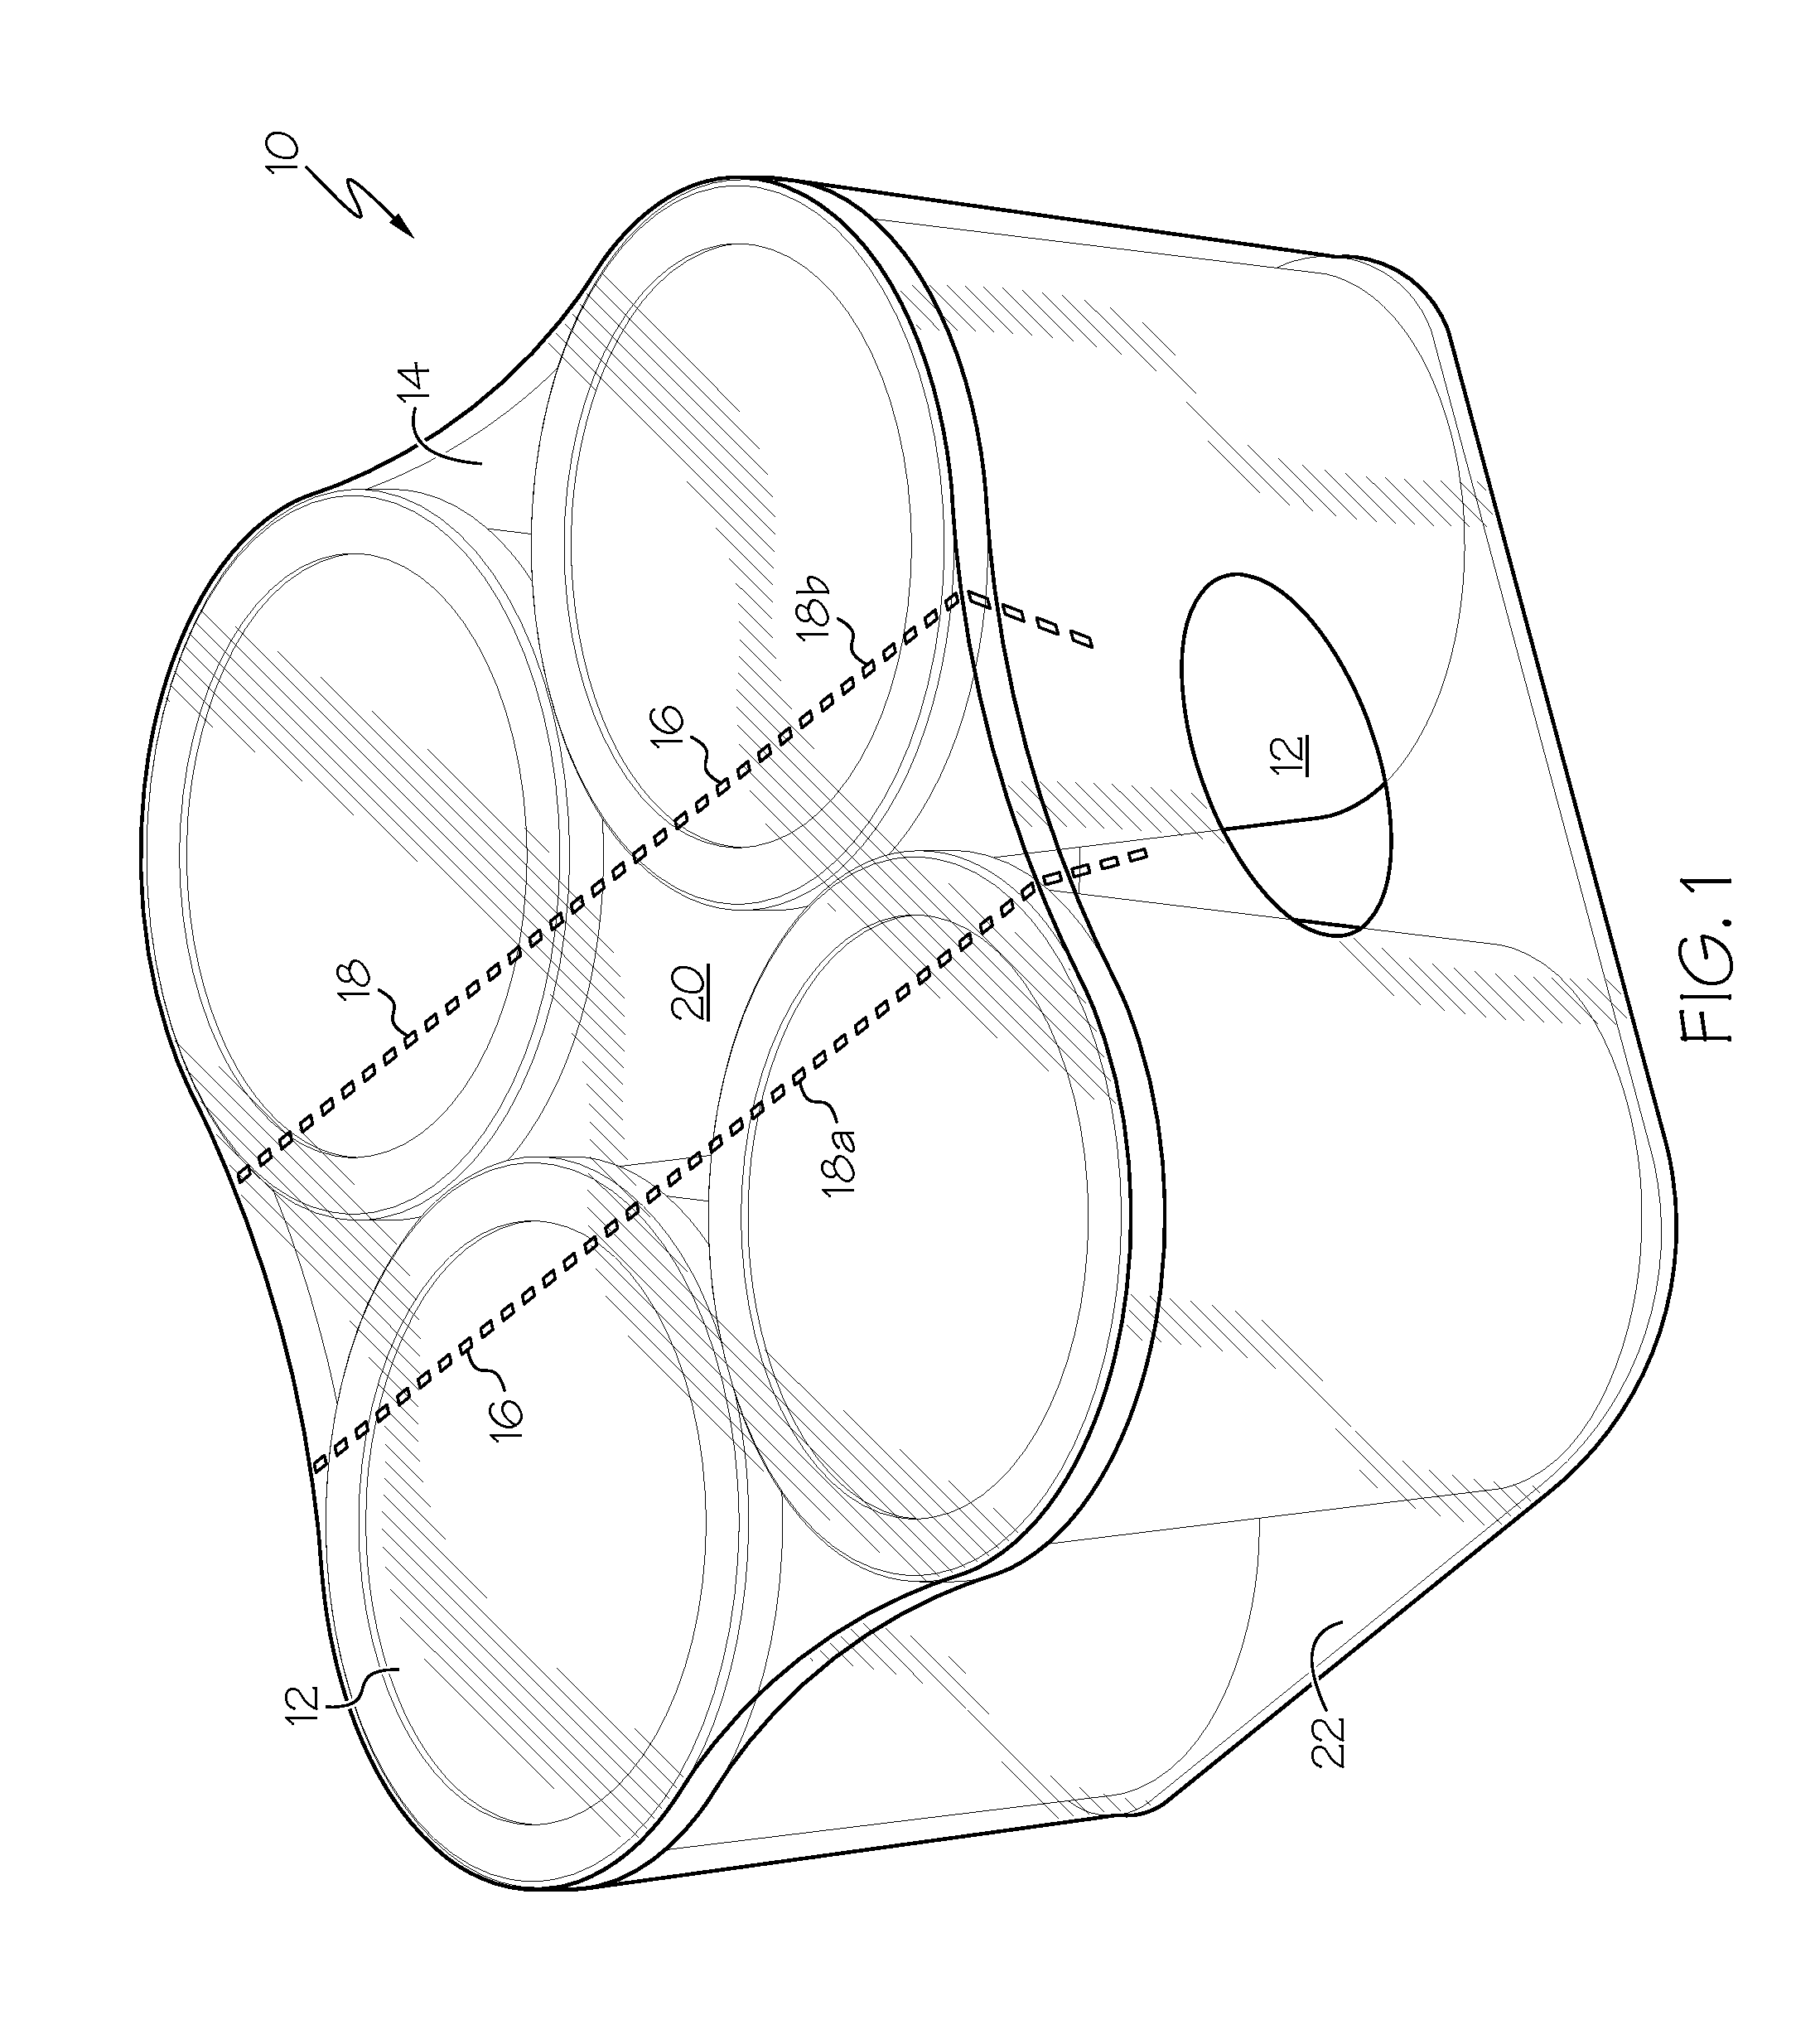 Package Assembly with Tear Away Film and Manufacturing System